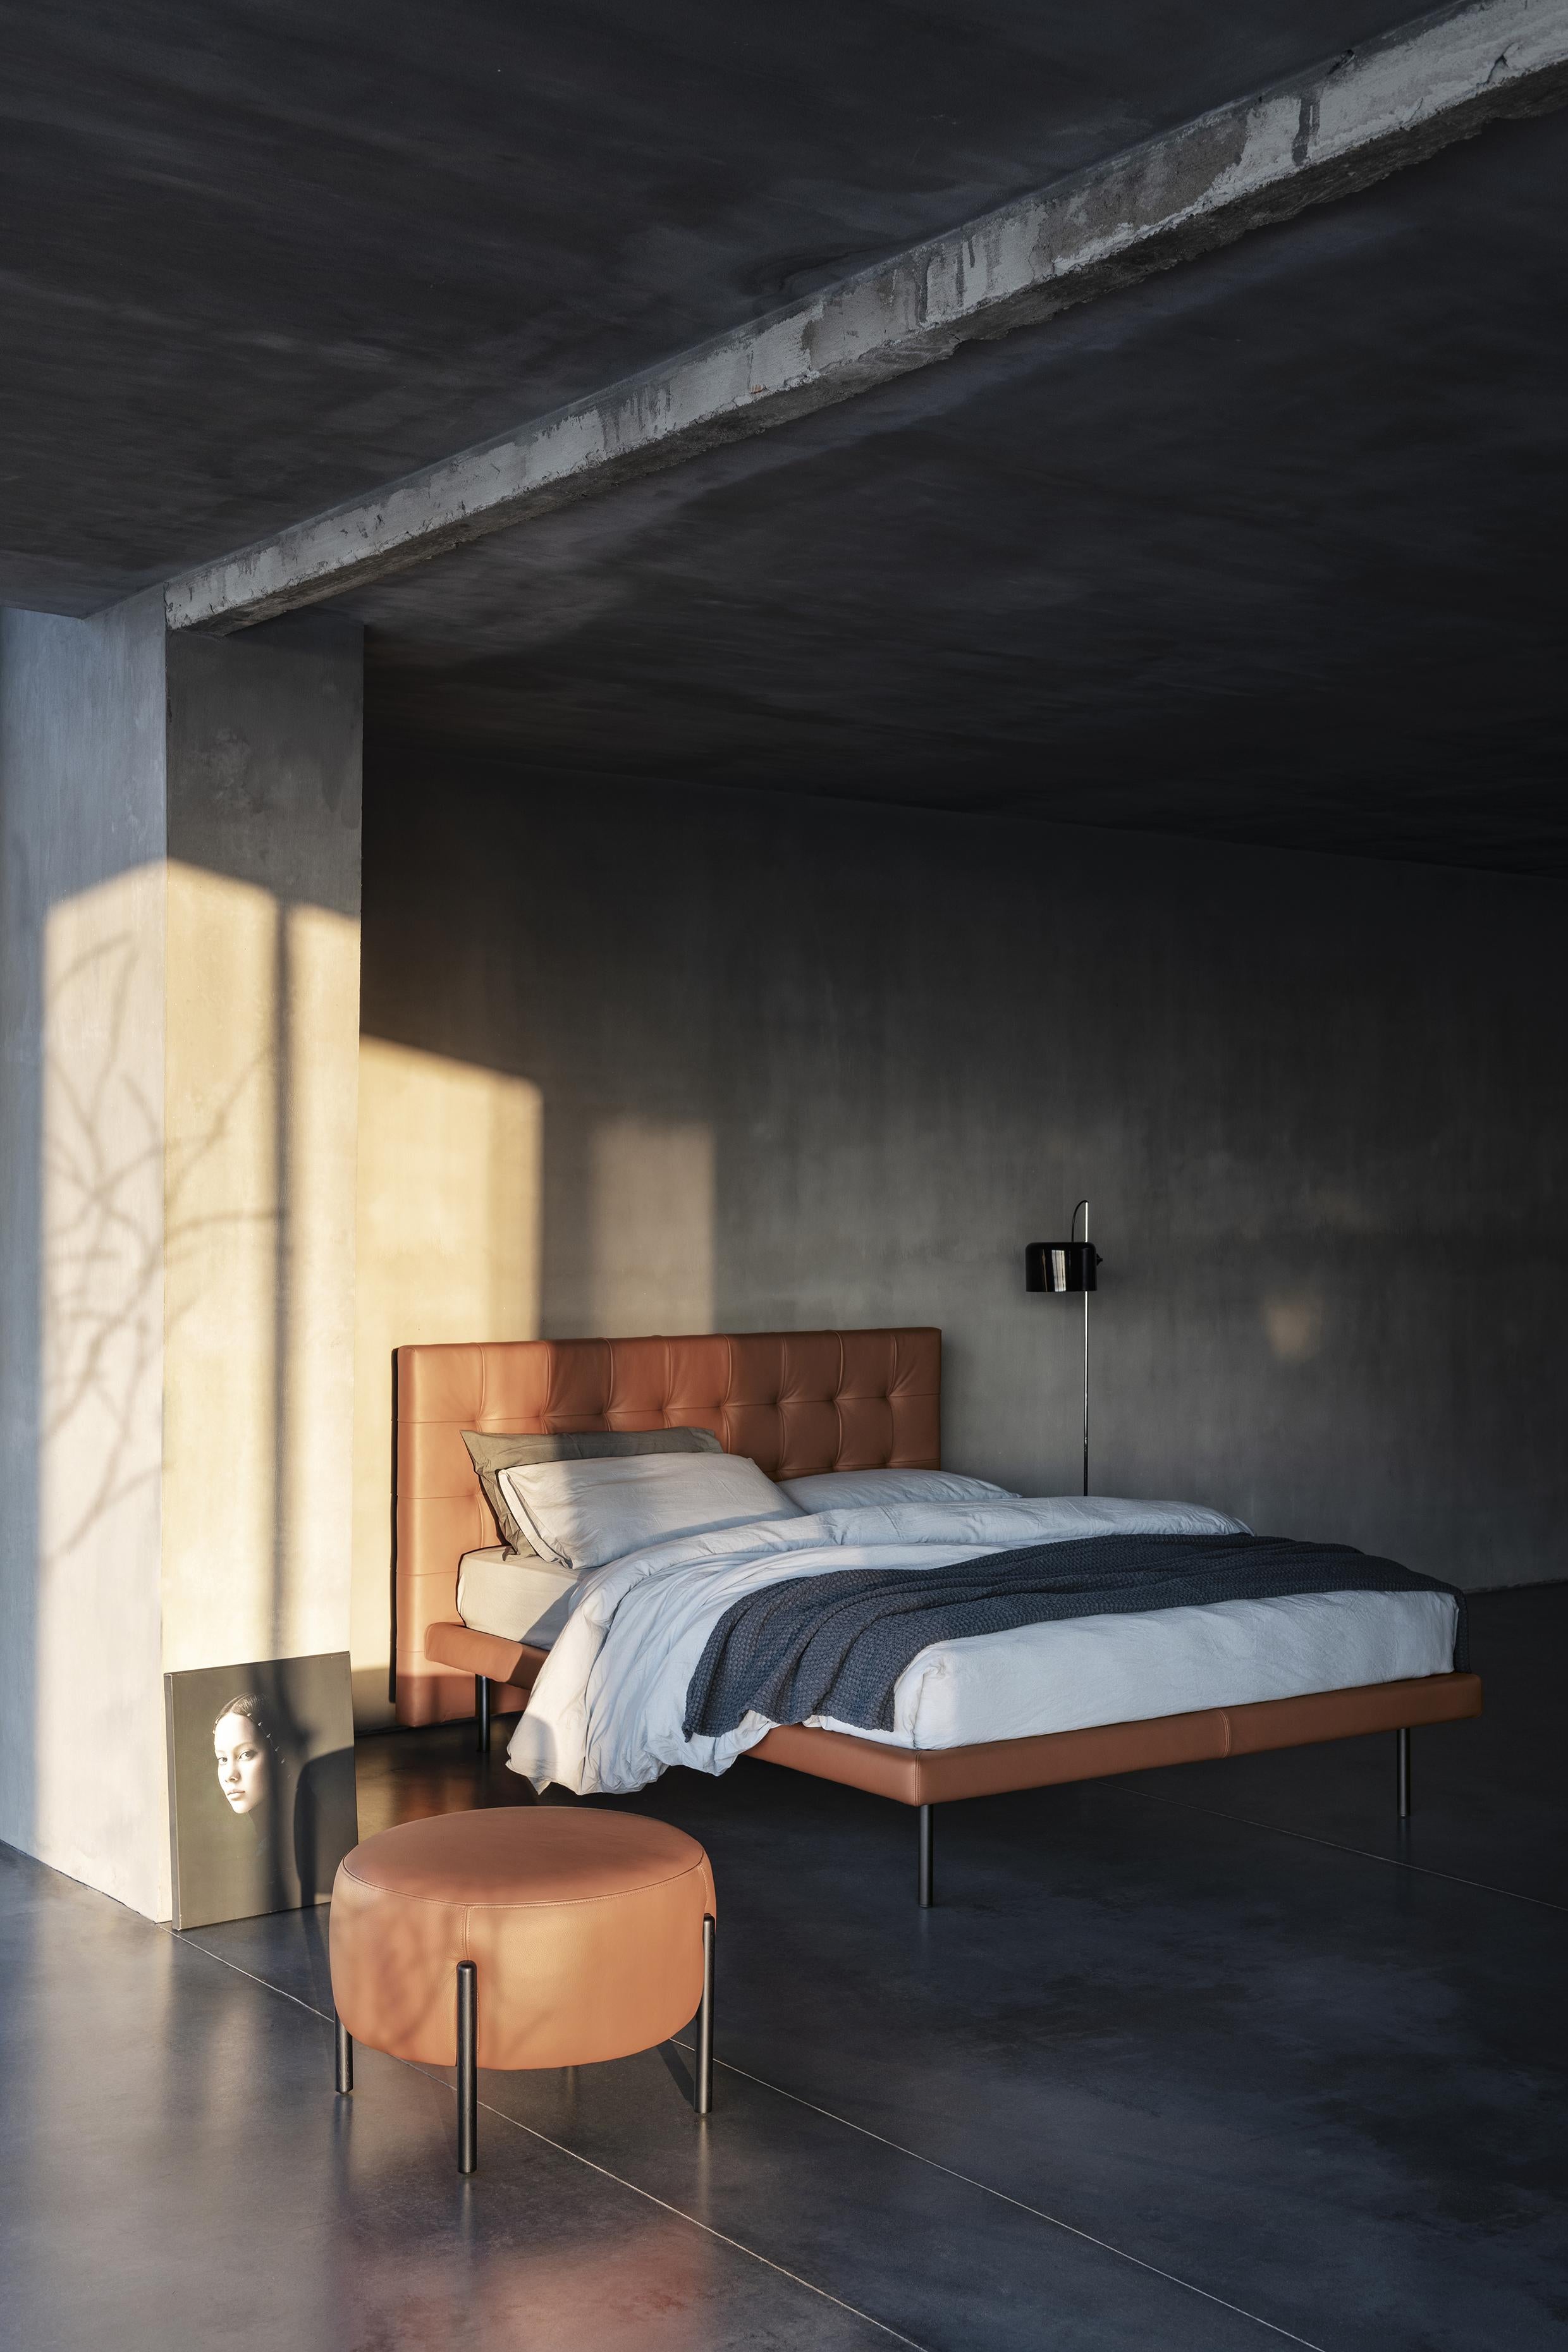 A re-invented classic in the sign of stylistic wisdom and tailoring care for details. Freedom symbolizes the contemporary simplicity of its lines, with the prestige and the comfort of its capitonné headboard. The seams at sight of its cover express